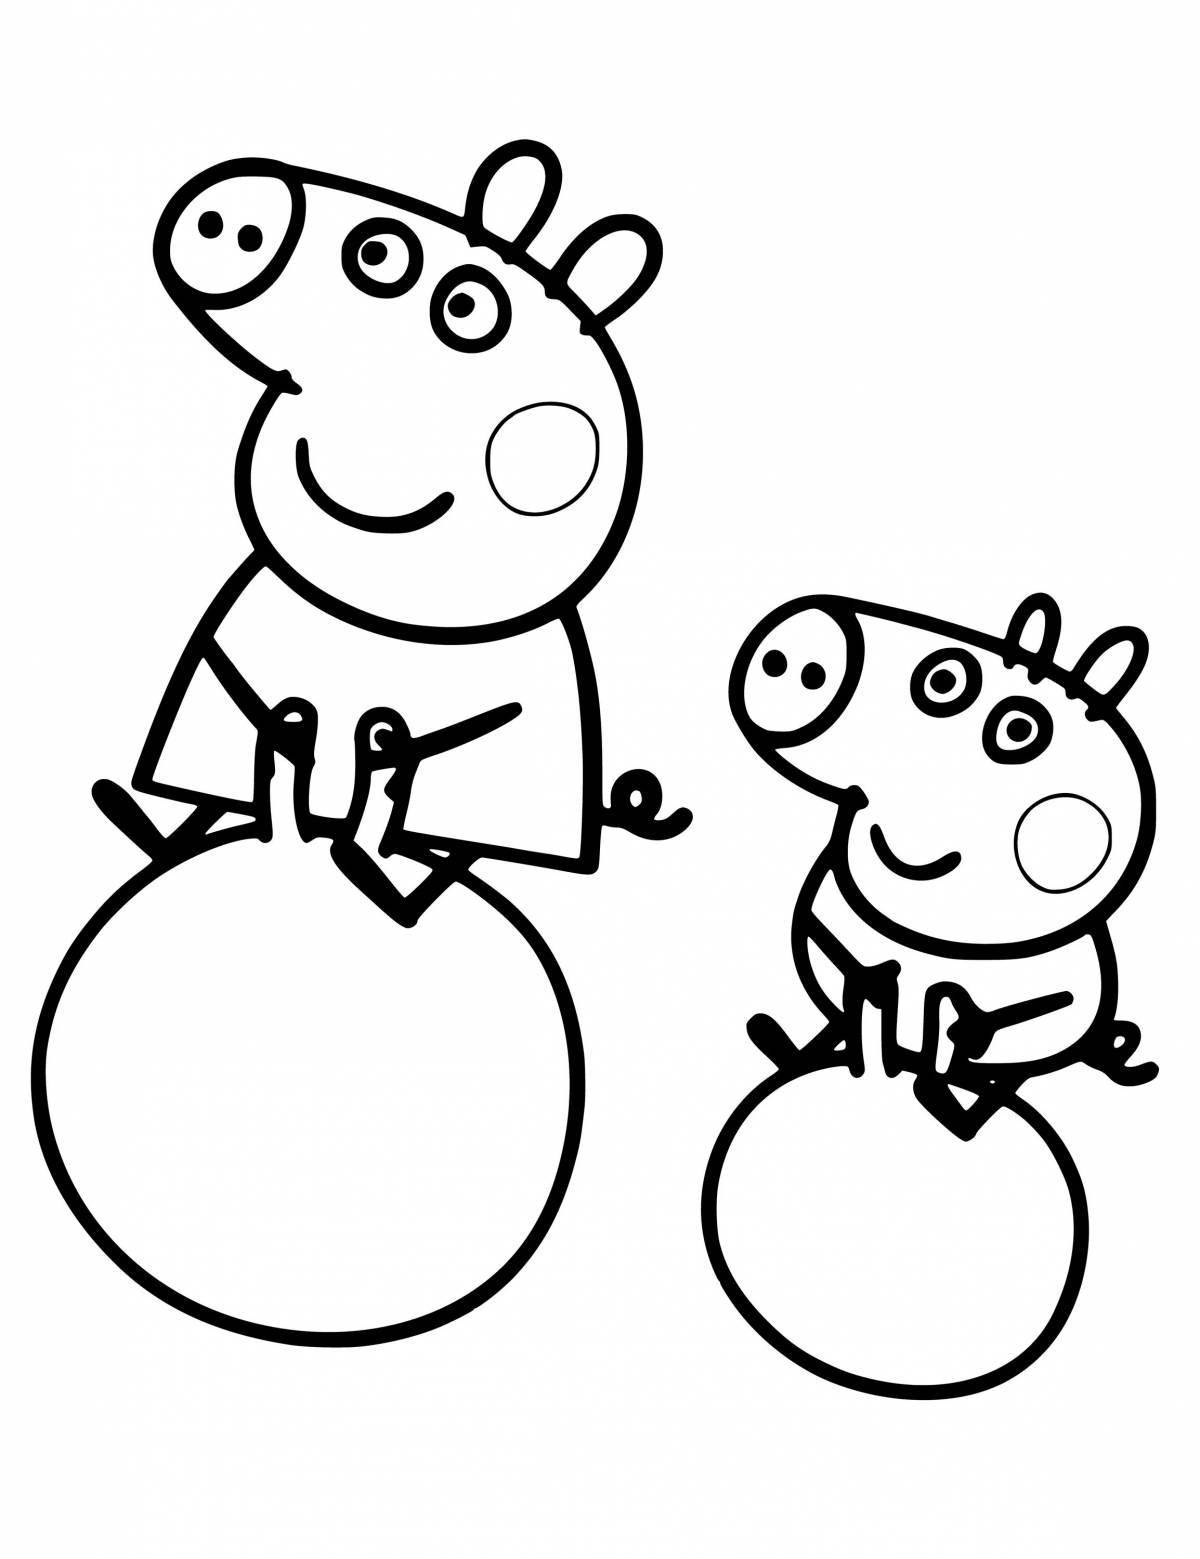 Coloring page george and peppa are delighted